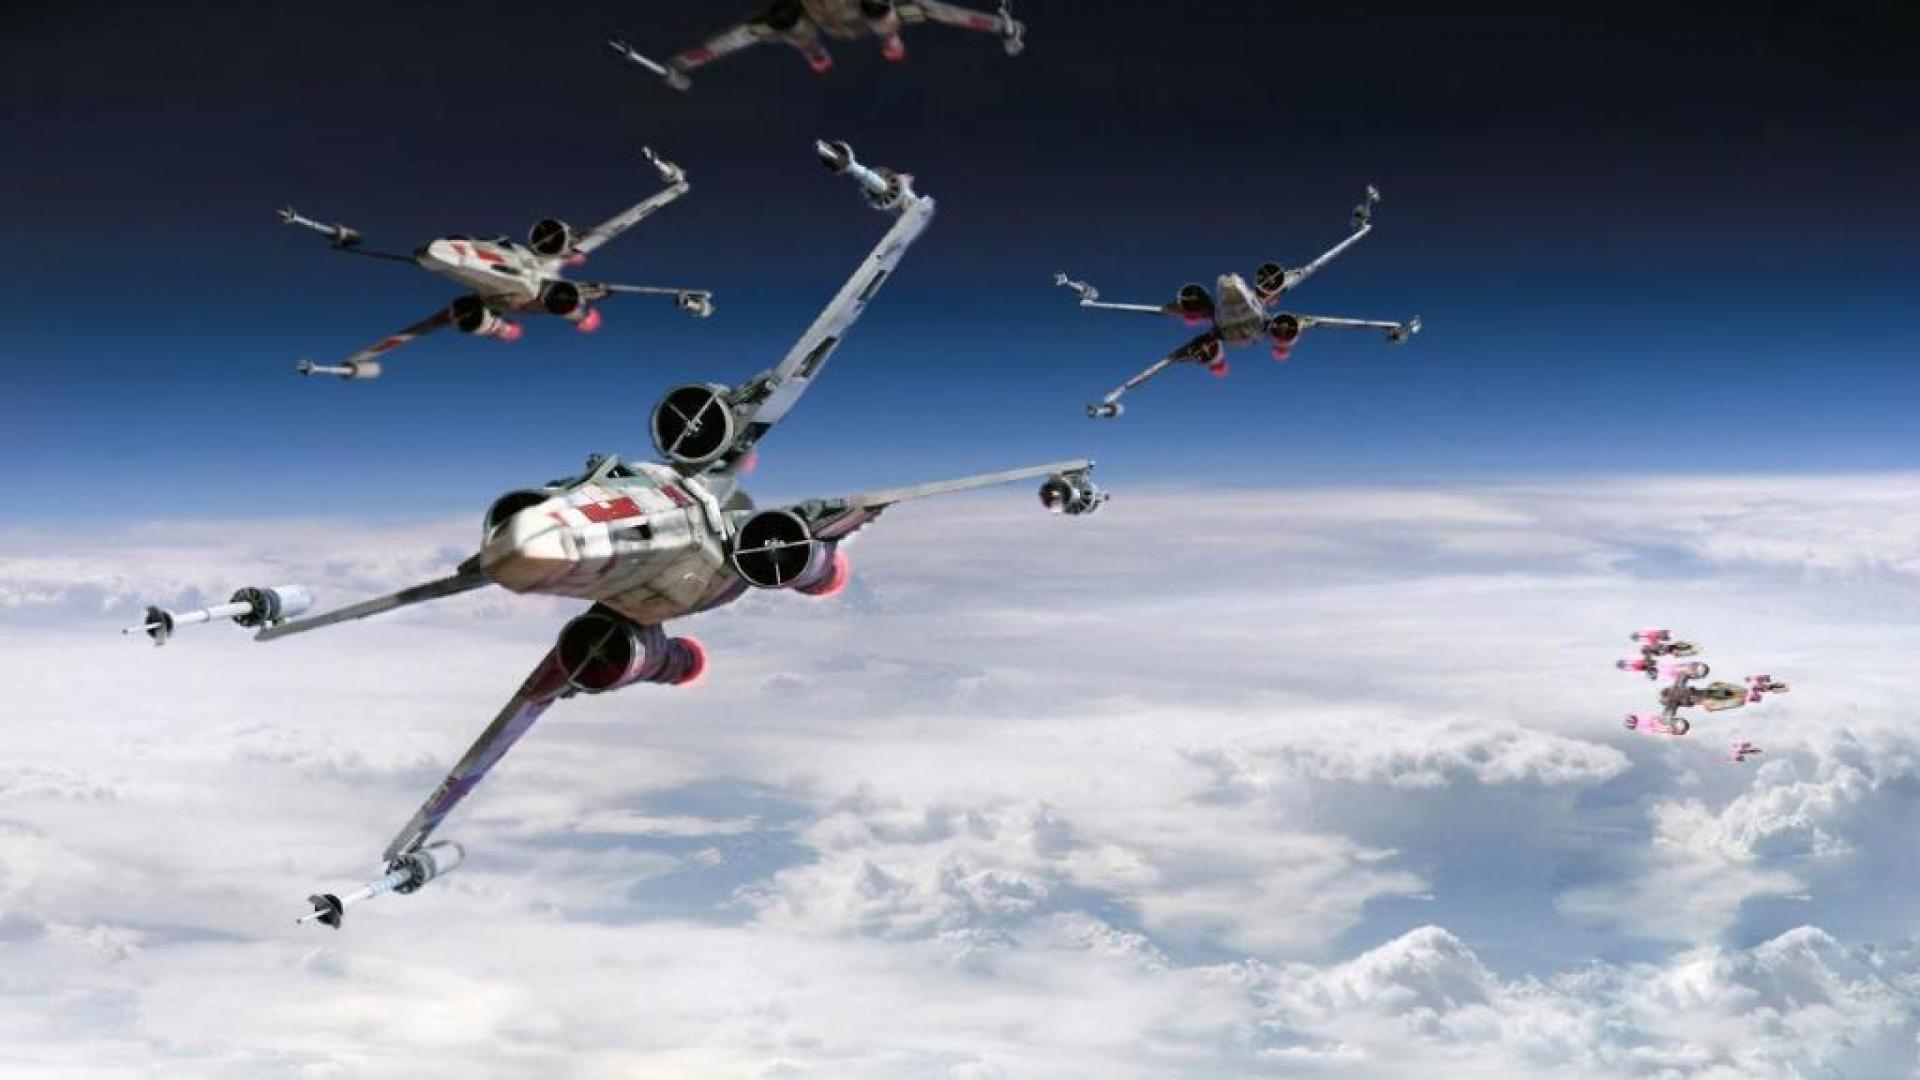 animated star wars xwing wallpaper